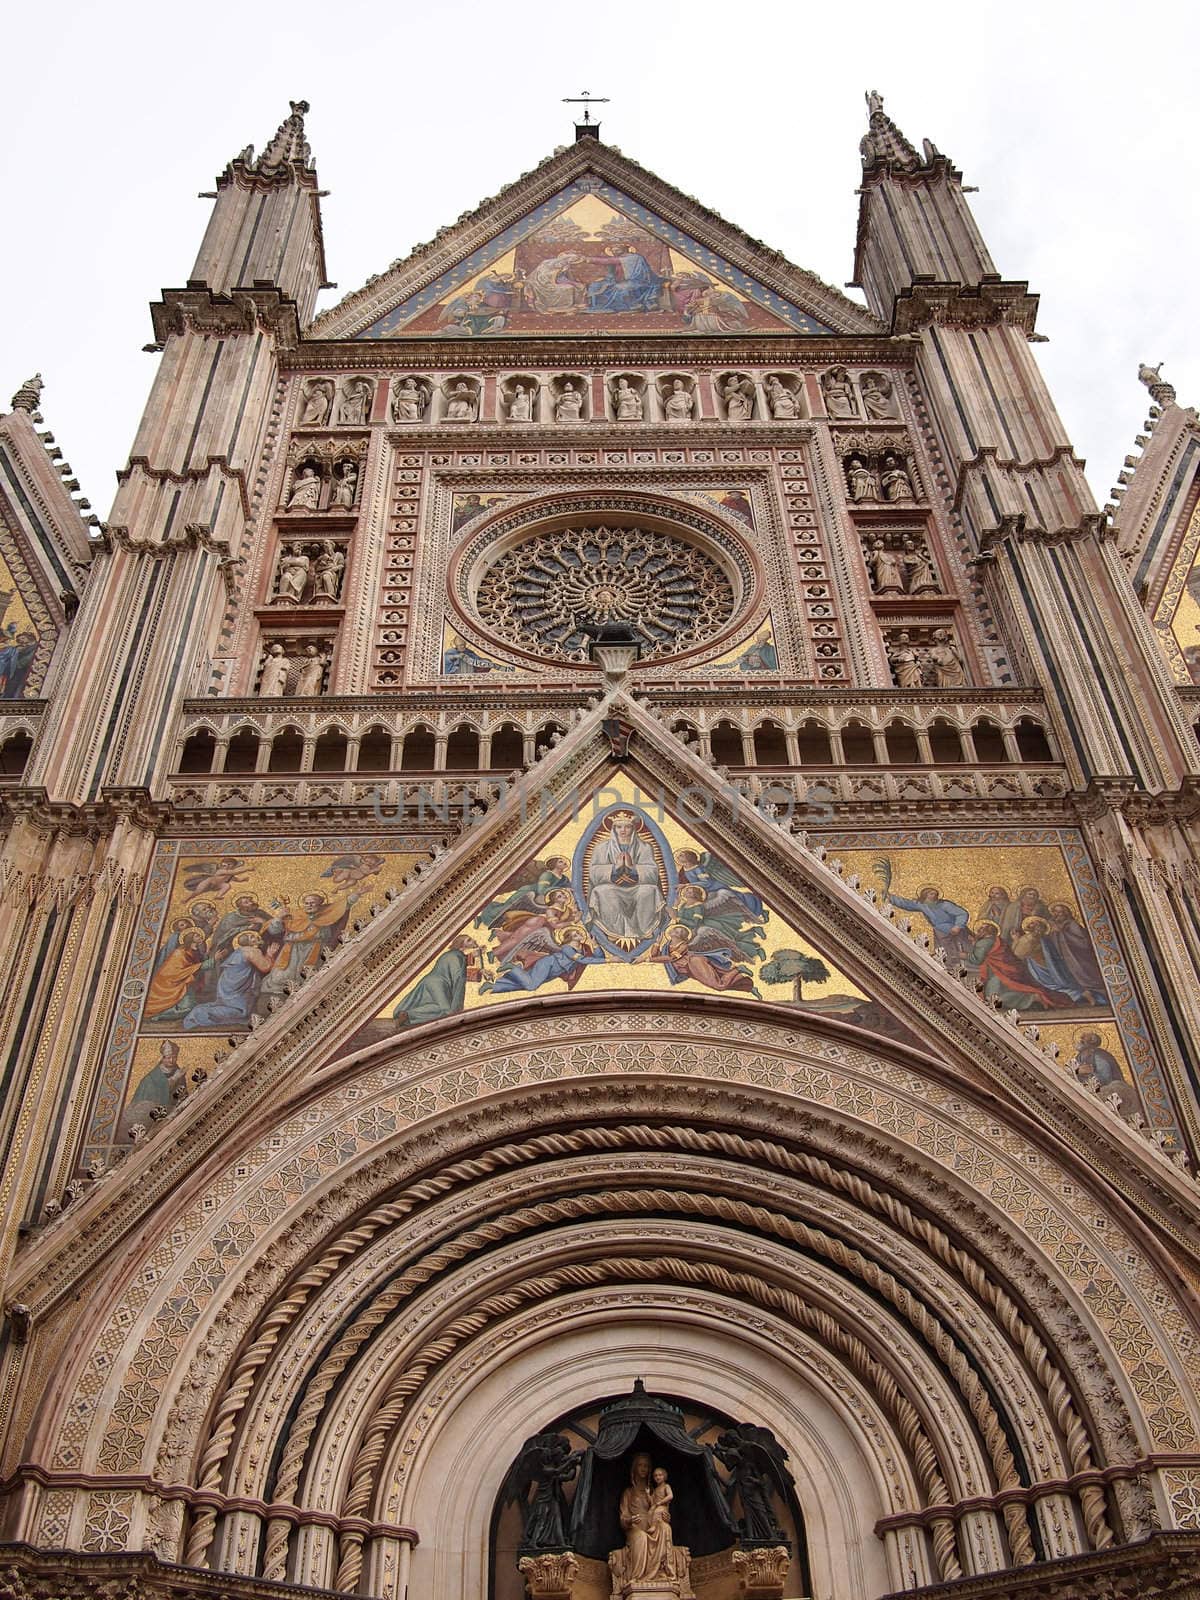 Front view of the mosaics of the gothic cathedral of Orvieto in Umbria, Italy.